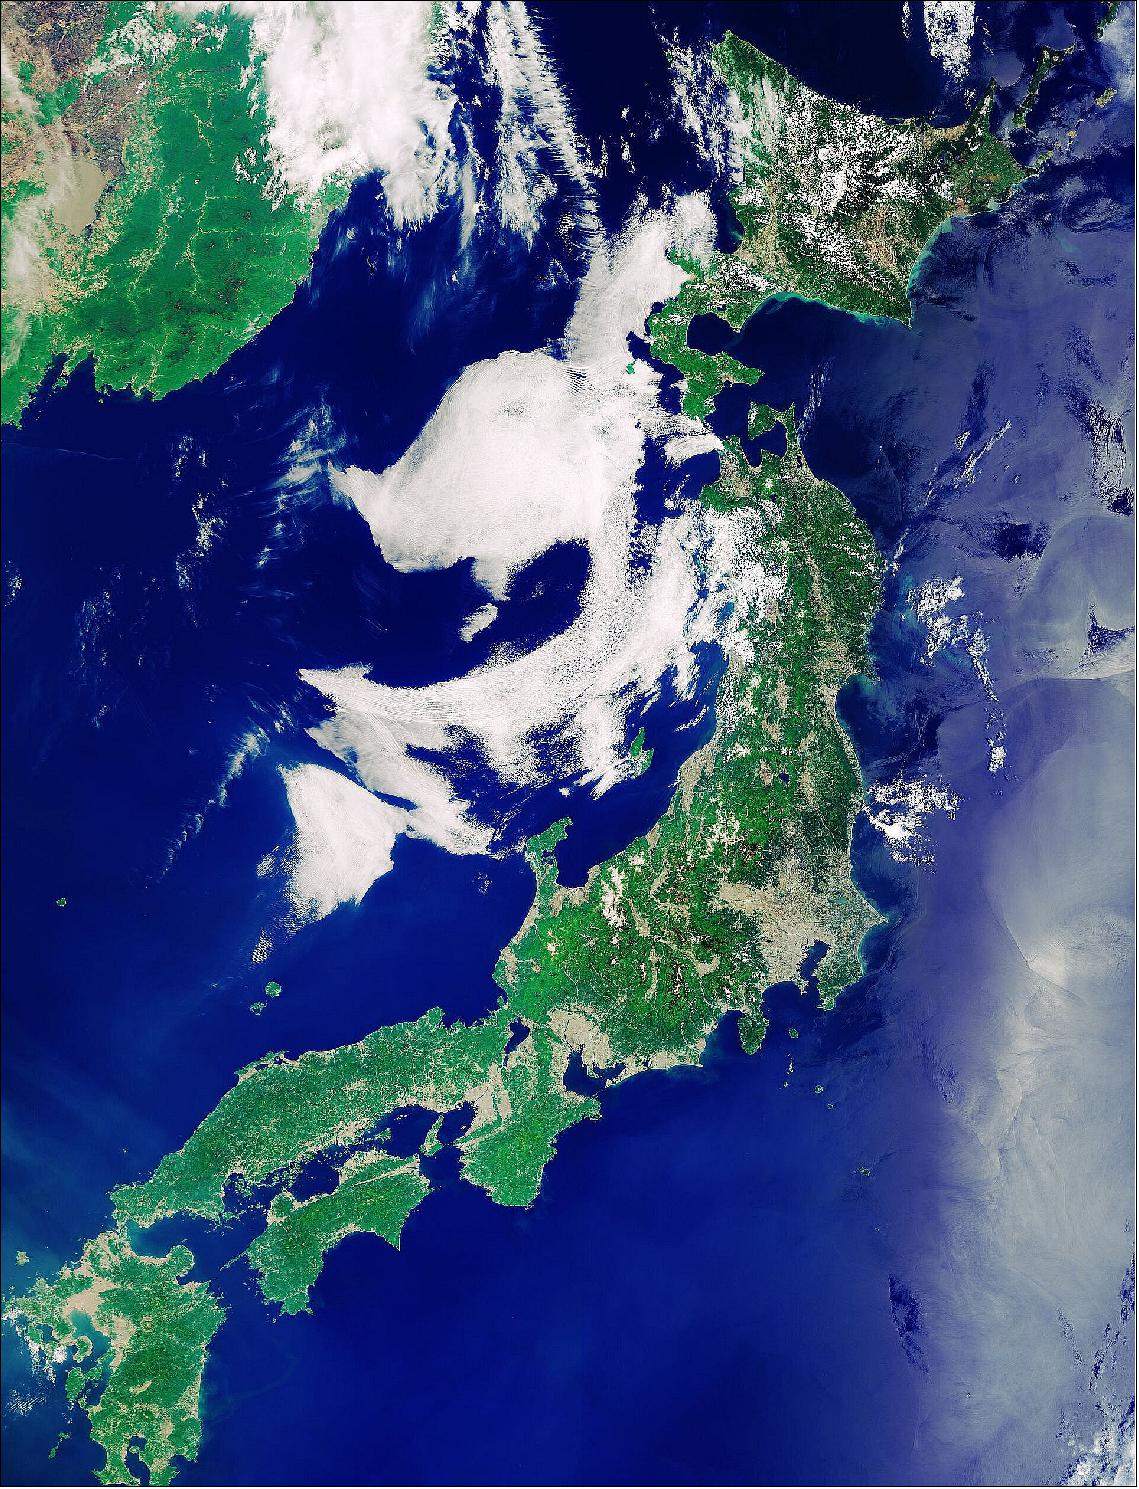 Figure 3: The Copernicus Sentinel-3 mission takes us over the Japanese archipelago – a string of islands that extends about 3000 km into the western Pacific Ocean. While the archipelago is made up of over 6000 islands, this image focuses on Japan's four main islands. Running from north to south, Hokkaido is visible in the top right corner, Honshu is the long island stretching in a northeast–southwest arc, Shikoku can be seen just beneath the lower part of Honshu, and Kyushu is at the bottom. - Honshu’s land mass comprises approximately four-fifths of Japan’s total area. Honshu’s main urban areas of Tokyo, Nagoya, and Osaka are clearly visible in the image. The large grey area in the east of the island, near the coast, is Tokyo, while the smaller areas depicted in grey are the areas around Nagoya and Osaka. - Honshu is also home to the country’s largest mountain, Mount Fuji. A volcano that has been dormant since it erupted in 1707, Mount Fuji is around 100 km southwest of Tokyo and its snow covered summit can be seen as a small white dot. - The Sea of Japan, also referred to as the East Sea, (visible to the west of the archipelago) separates the country from the east coast of Asia. The turquoise waters surrounding the island of Hokkaido can be seen at the top of the image, while the waters in the right of the image have a silvery hue because of sunglint – an optical effect caused by the mirror-like reflection of sunlight from the water surface back to the satellite sensor. (image credit: ESA, the image contains modified Copernicus Sentinel data (2019), processed by ESA, CC BY-SA 3.0 IGO)